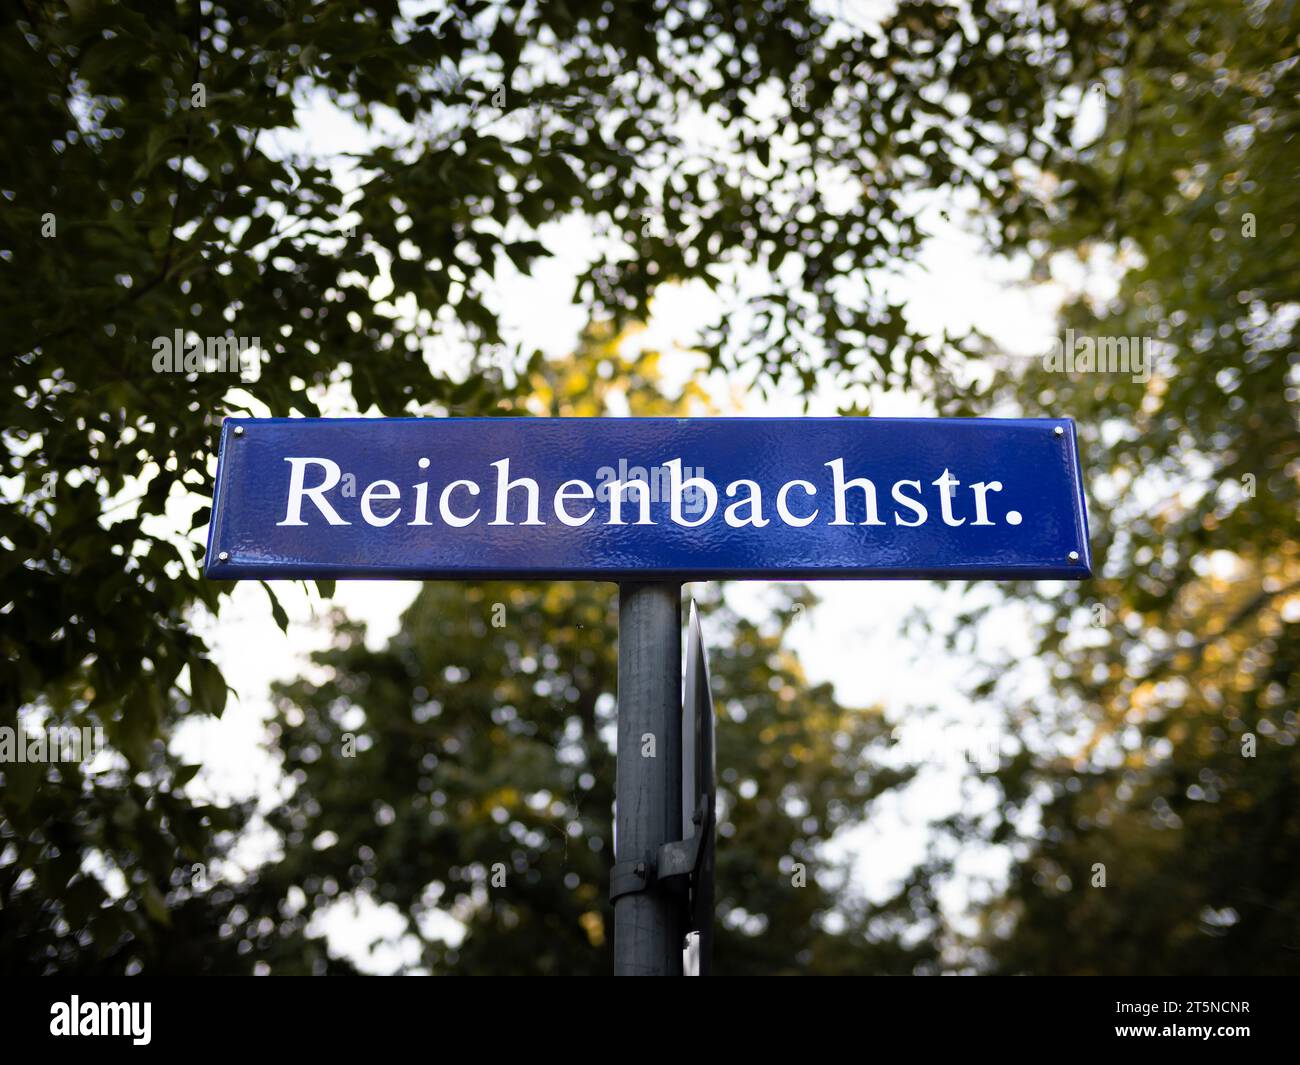 Reichenbachstr. road name sign in Germany close up. The white letters of the street information are on a blue metal plate. Lush foliage is behind. Stock Photo